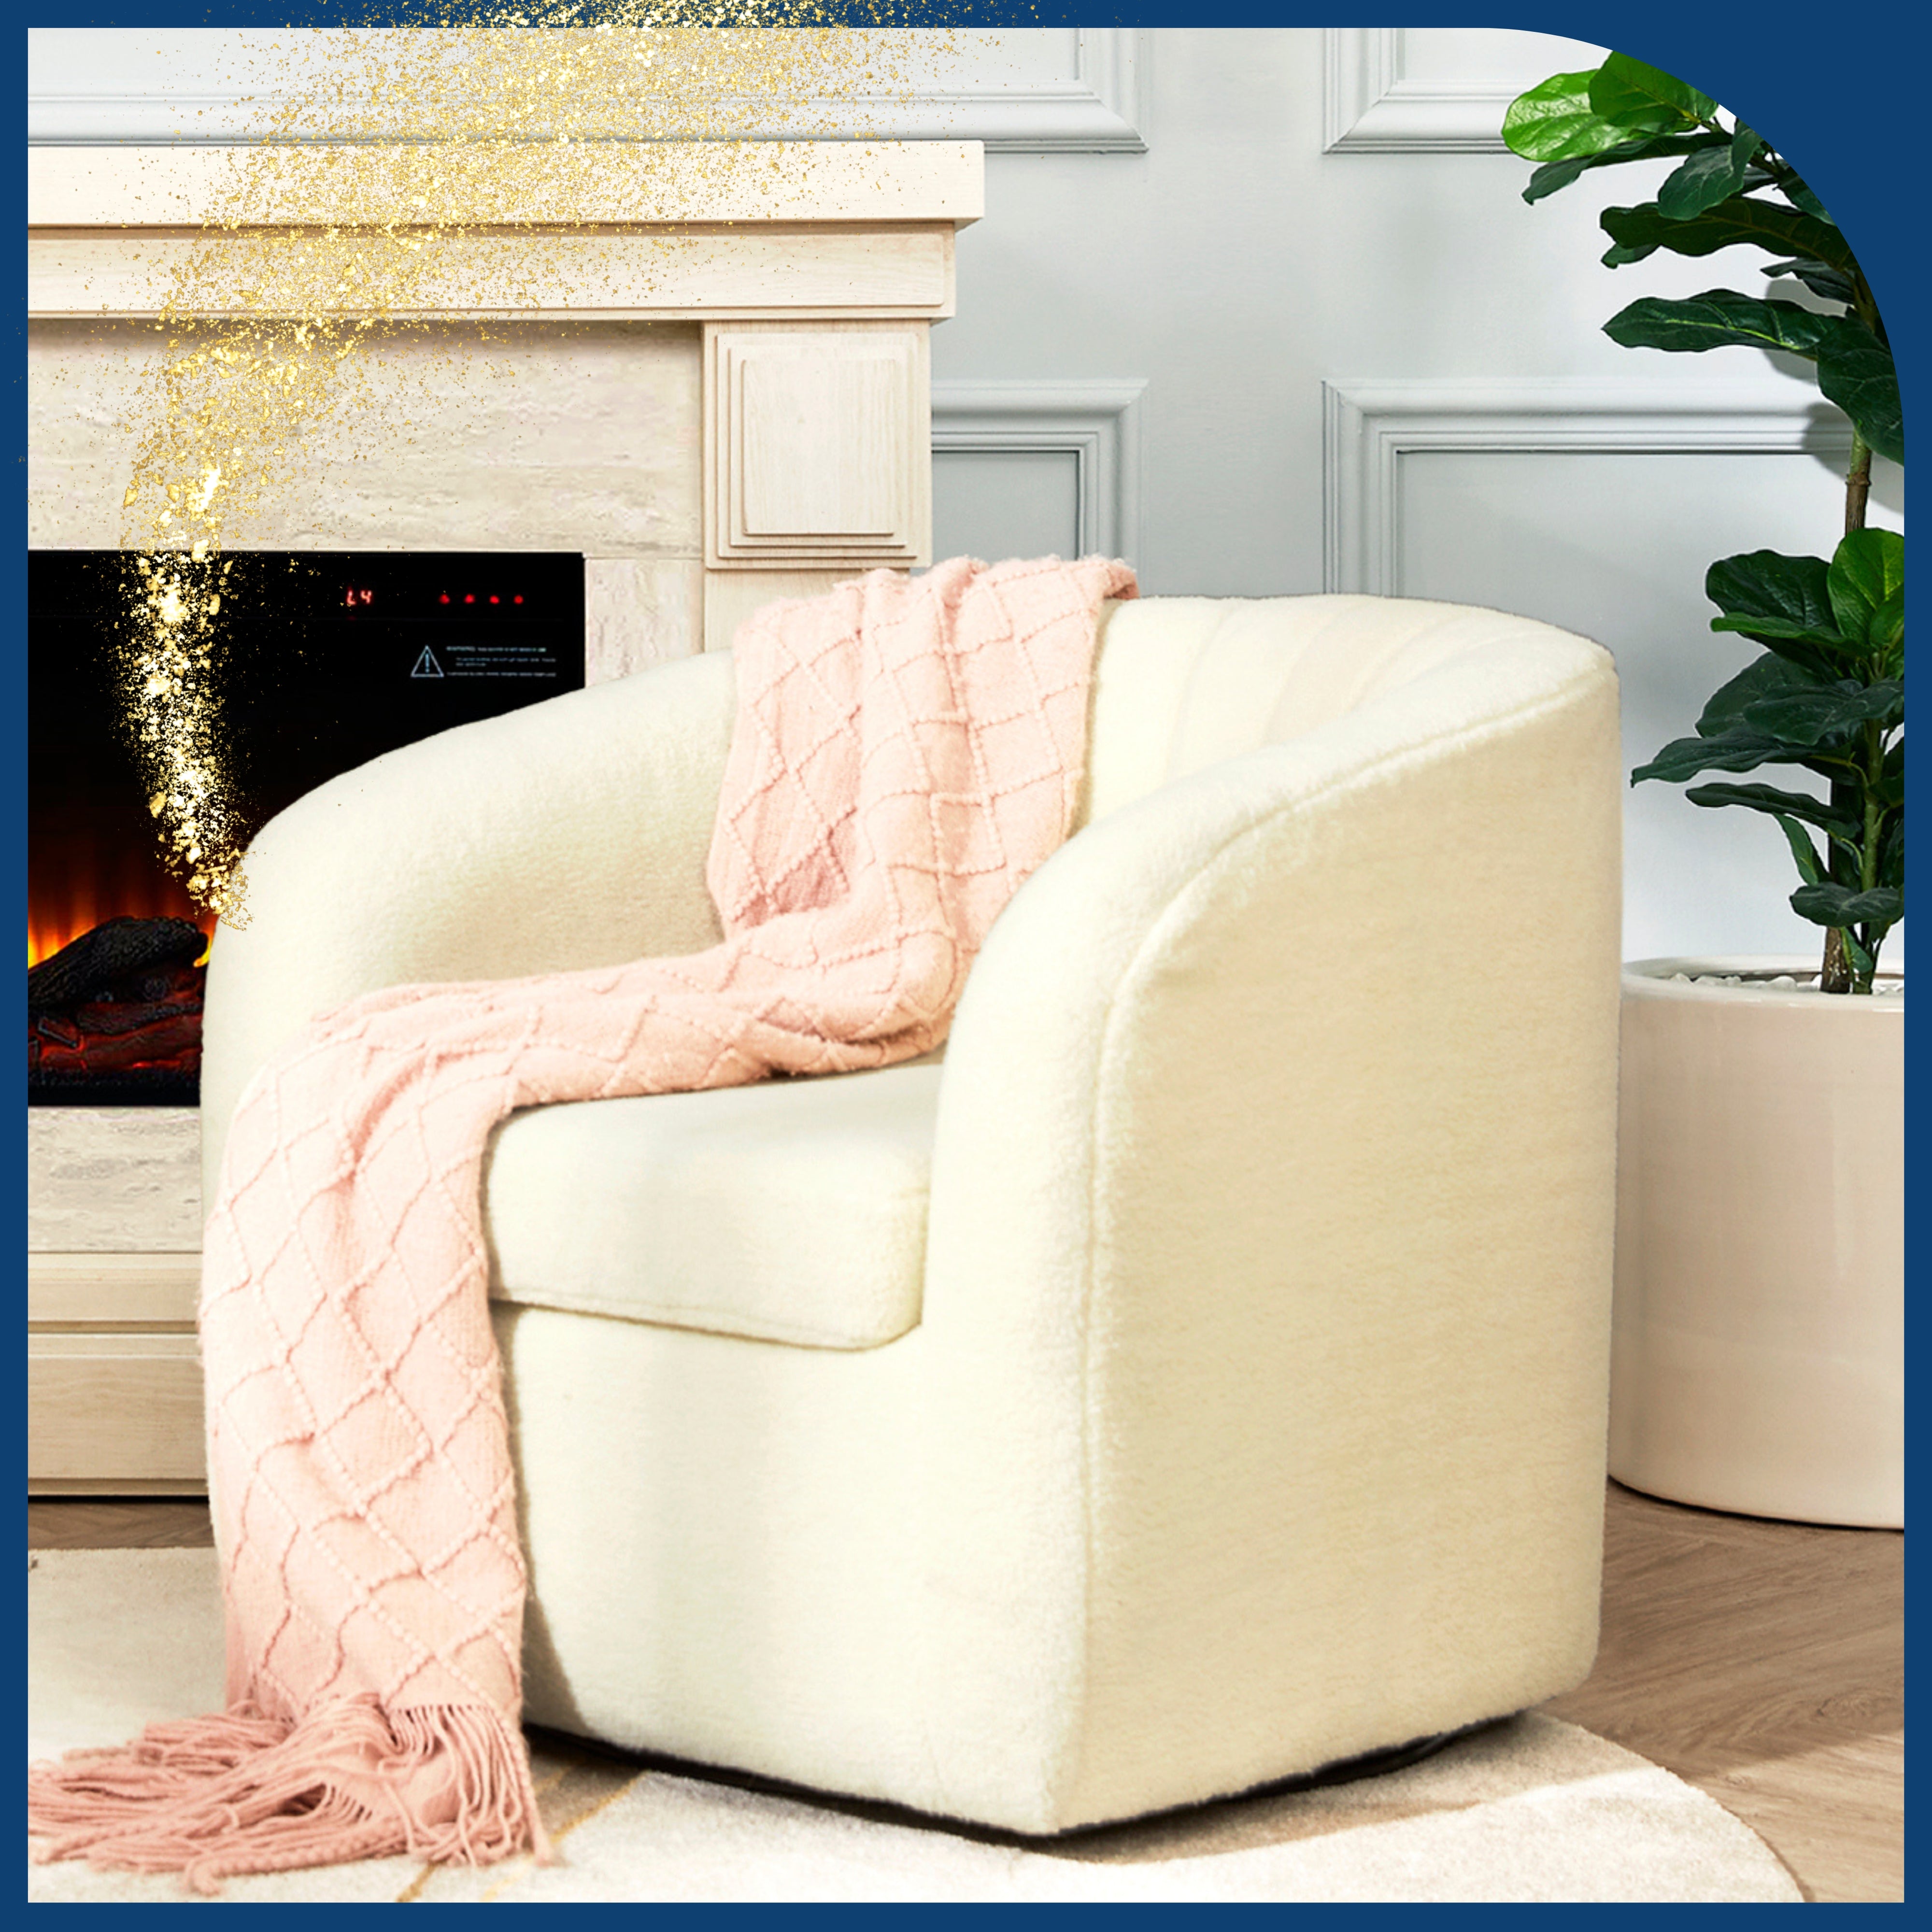 The ivory Monroe swivel chair looks welcoming with a warn blanket draped over it, next to a cozy fireplace